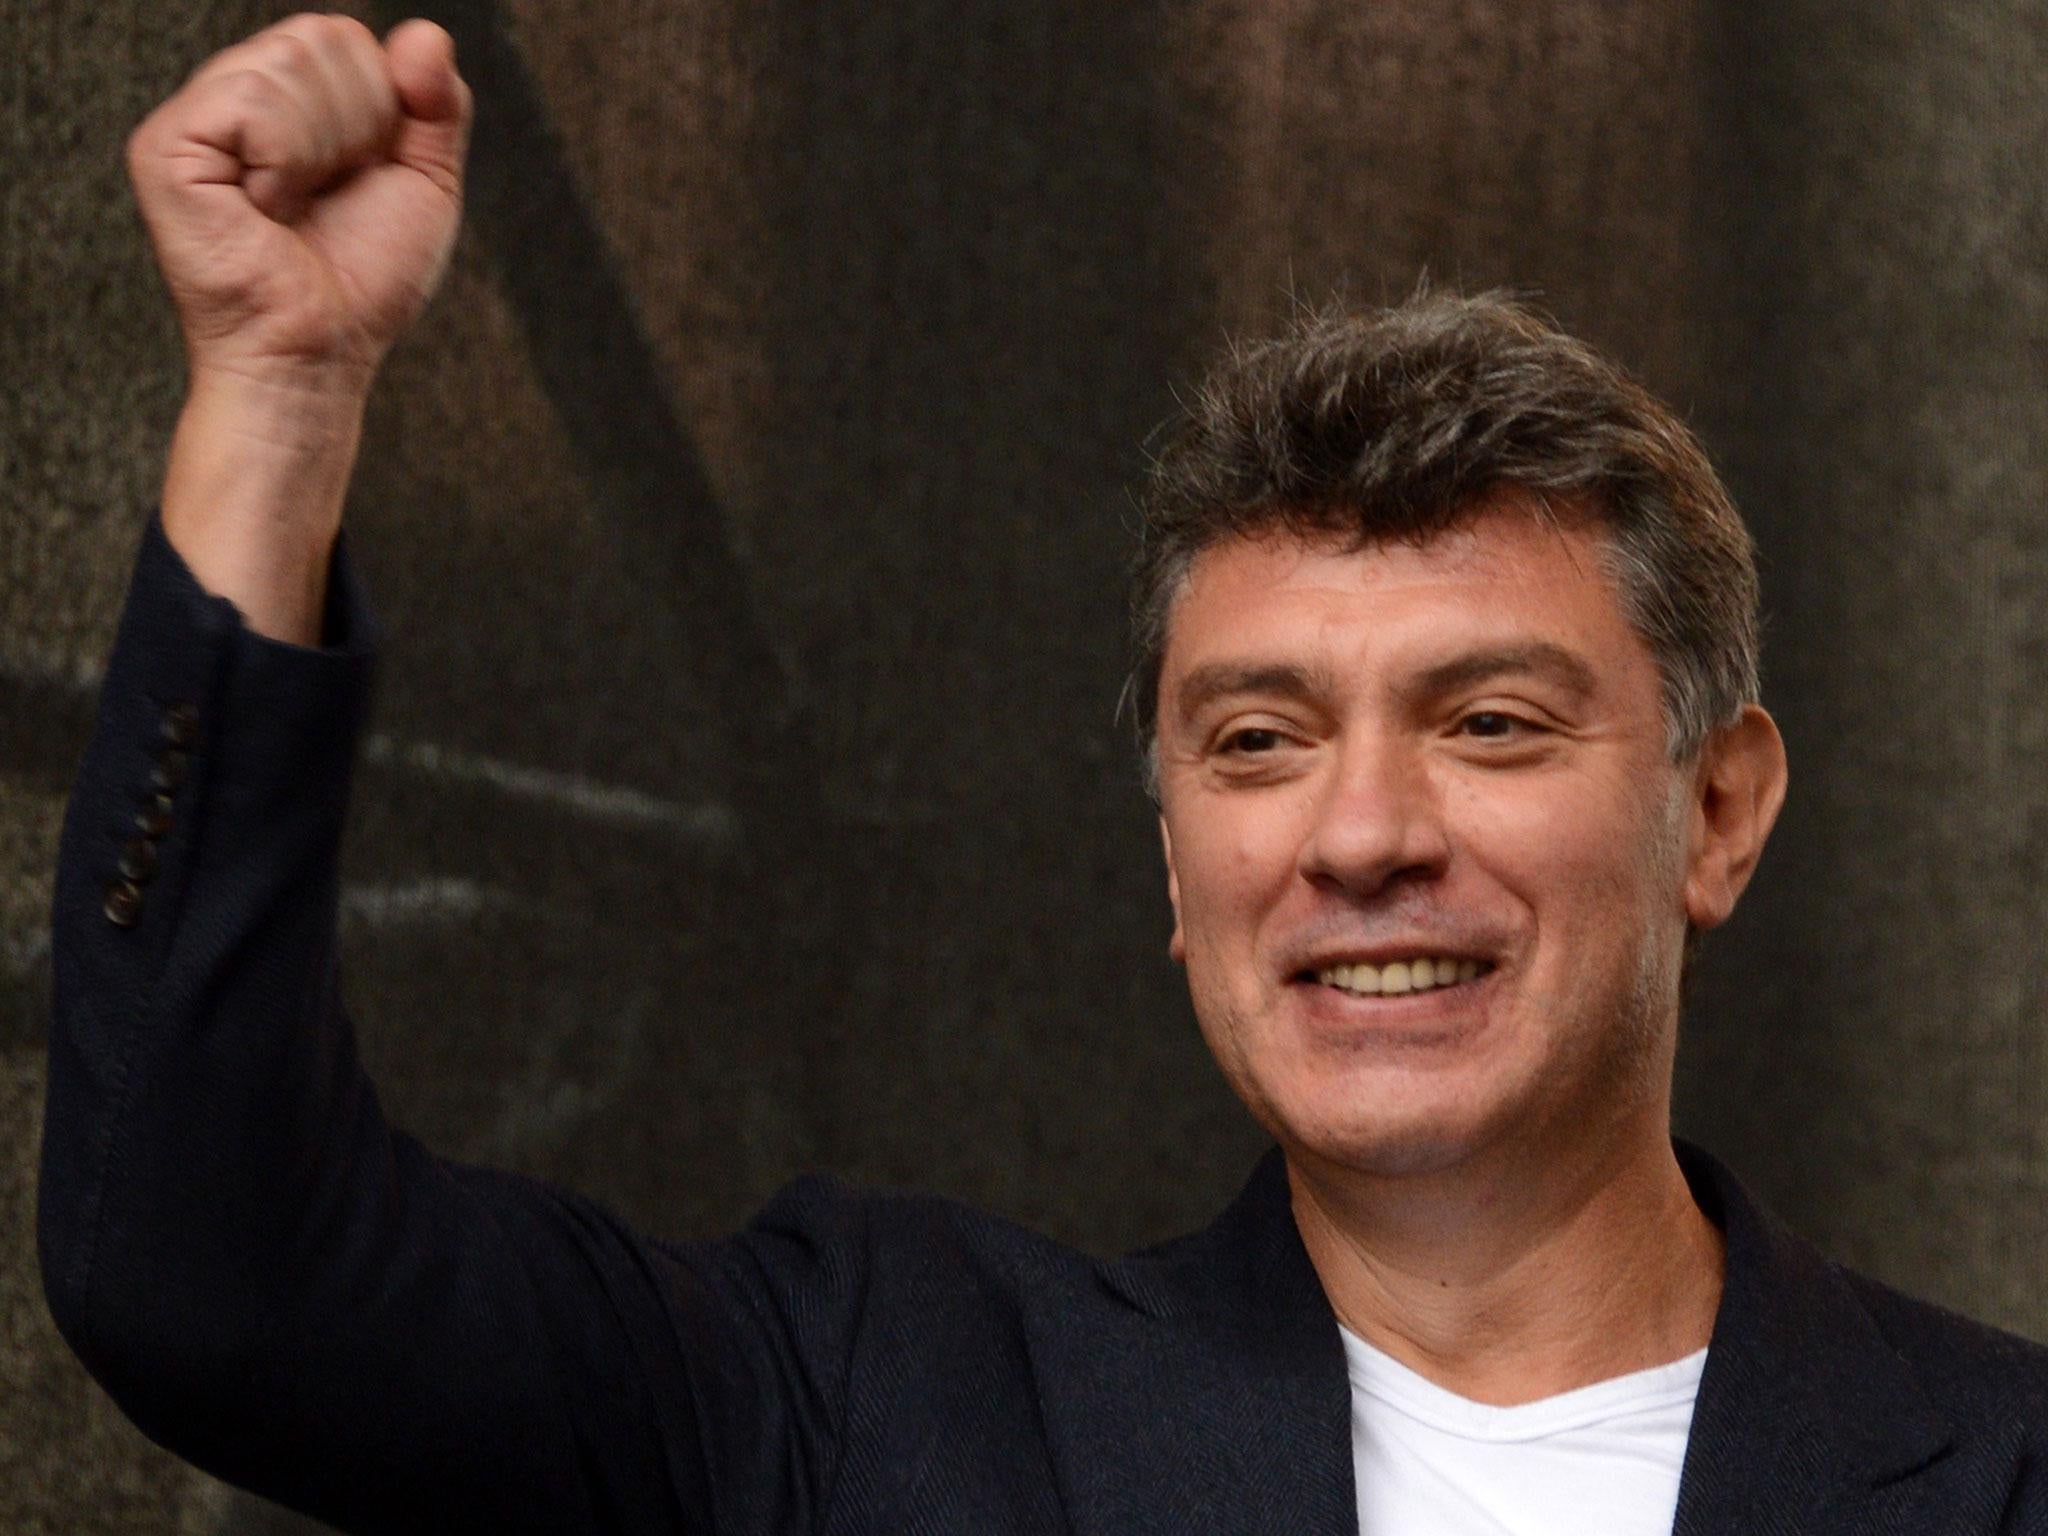 Boris Nemtsov, 55, former deputy prime minister and opposition leader, was shot four times in the back in Moscow, 27 February, 2015